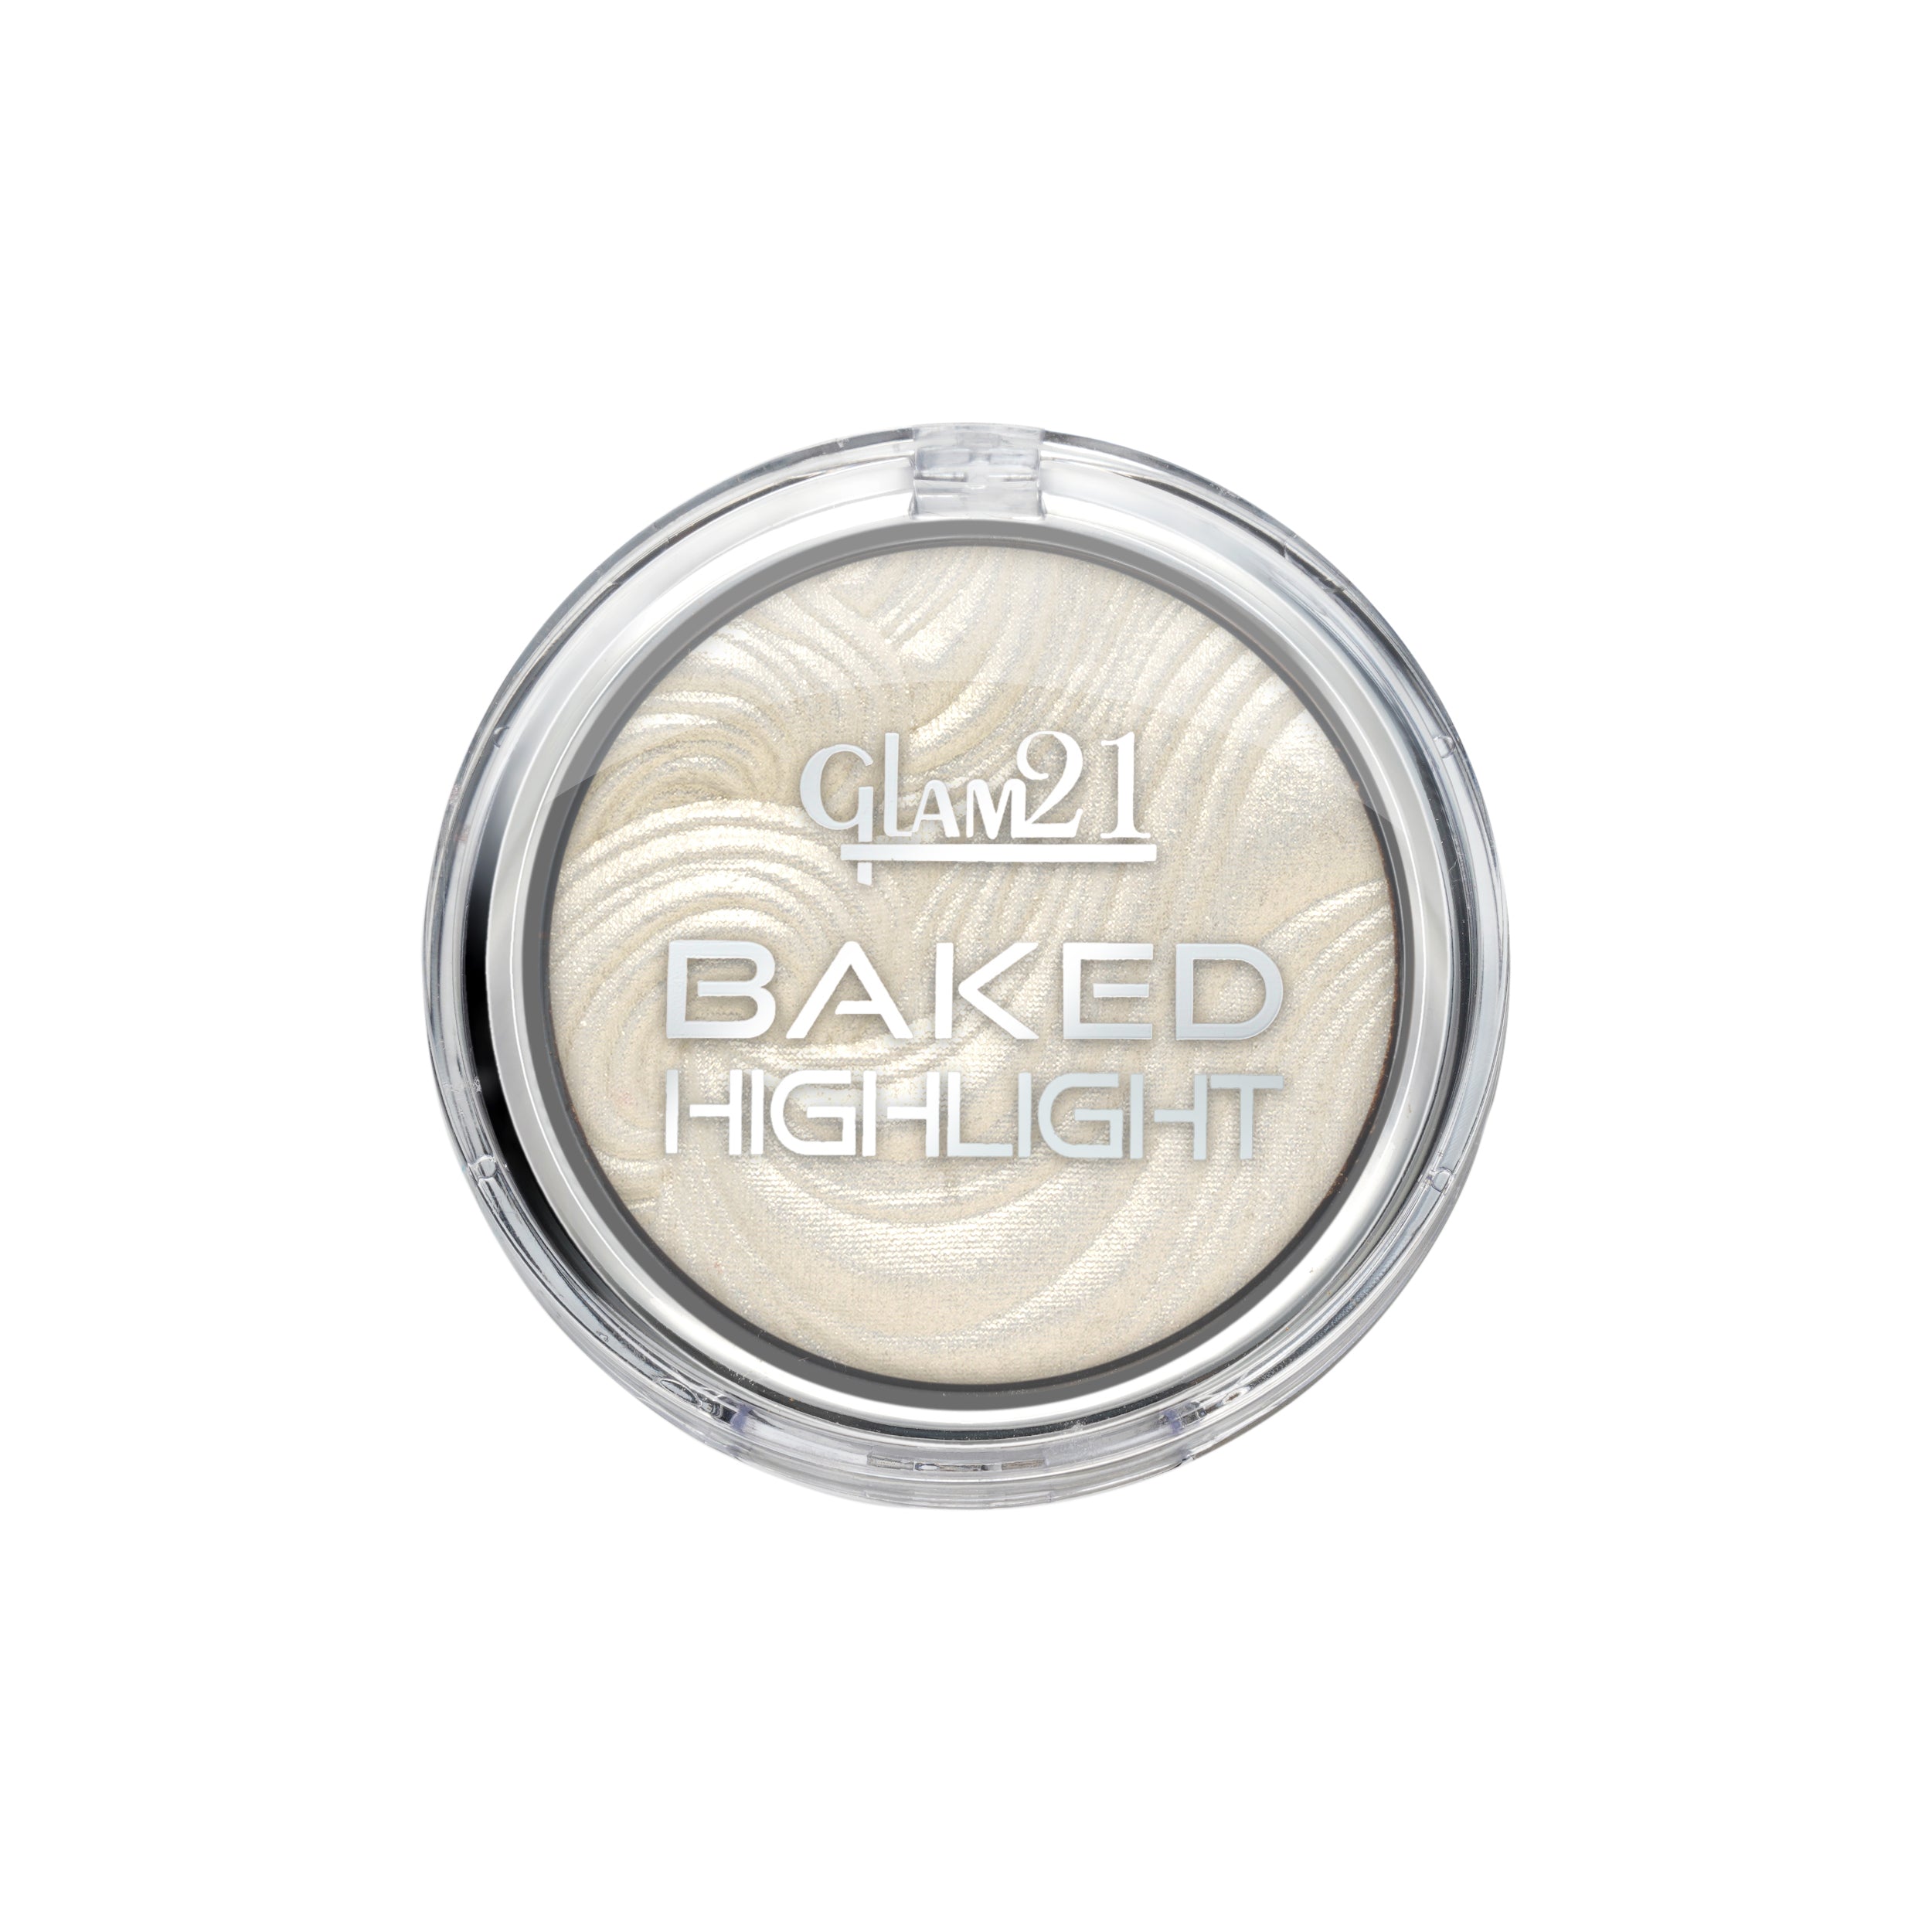 Glam21 Baked Highlighter with Silky Pigments Shimmer Look & Longlasting Mettalic Finish Highlighter, 2.8 g (Shade-01)